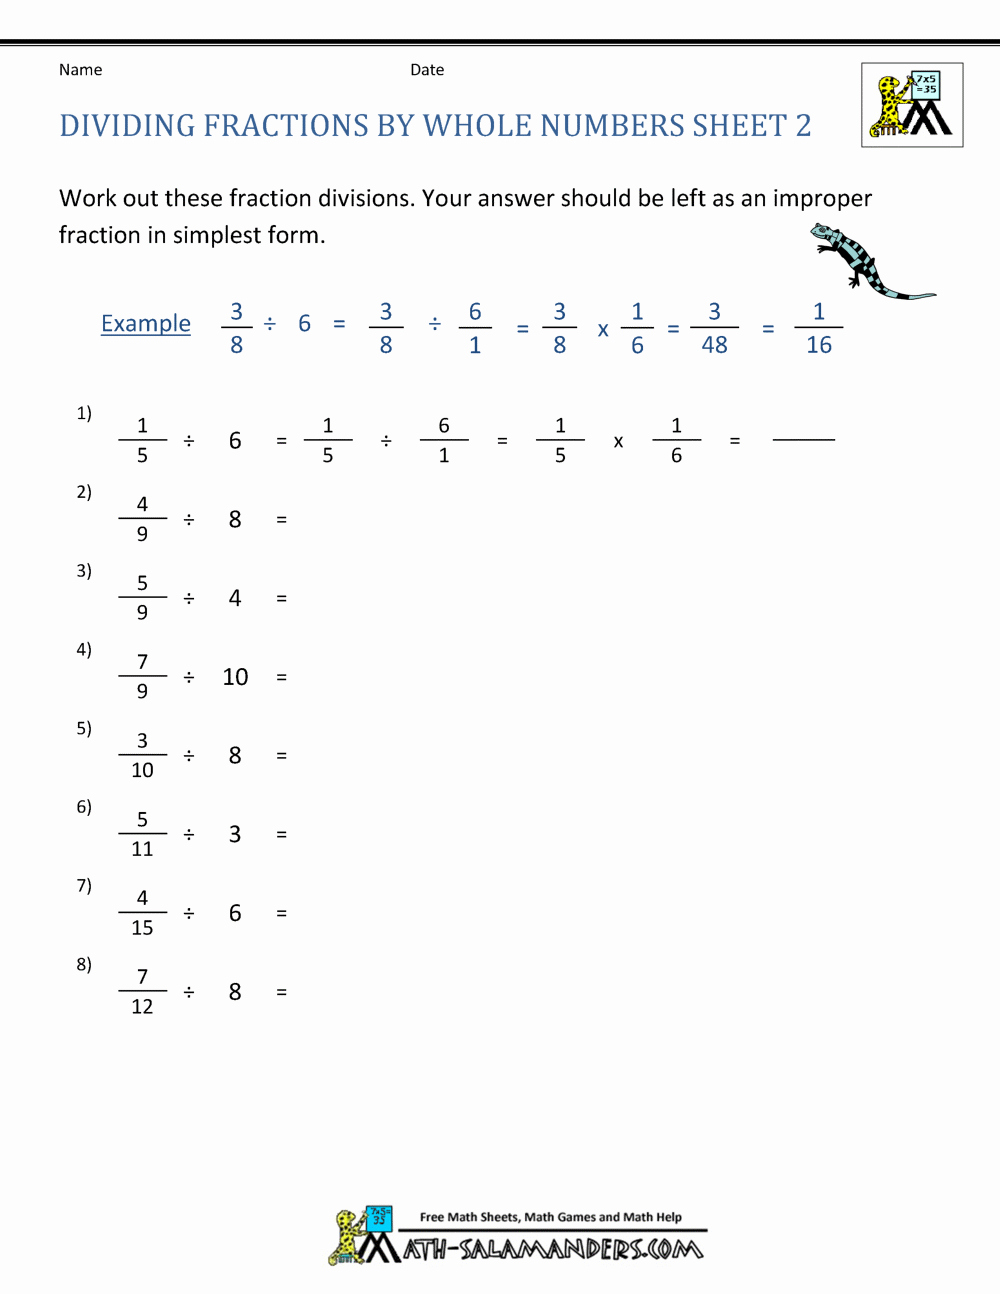 Dividing Fractions Worksheet Pdf Fresh Dividing Fractions by whole Numbers